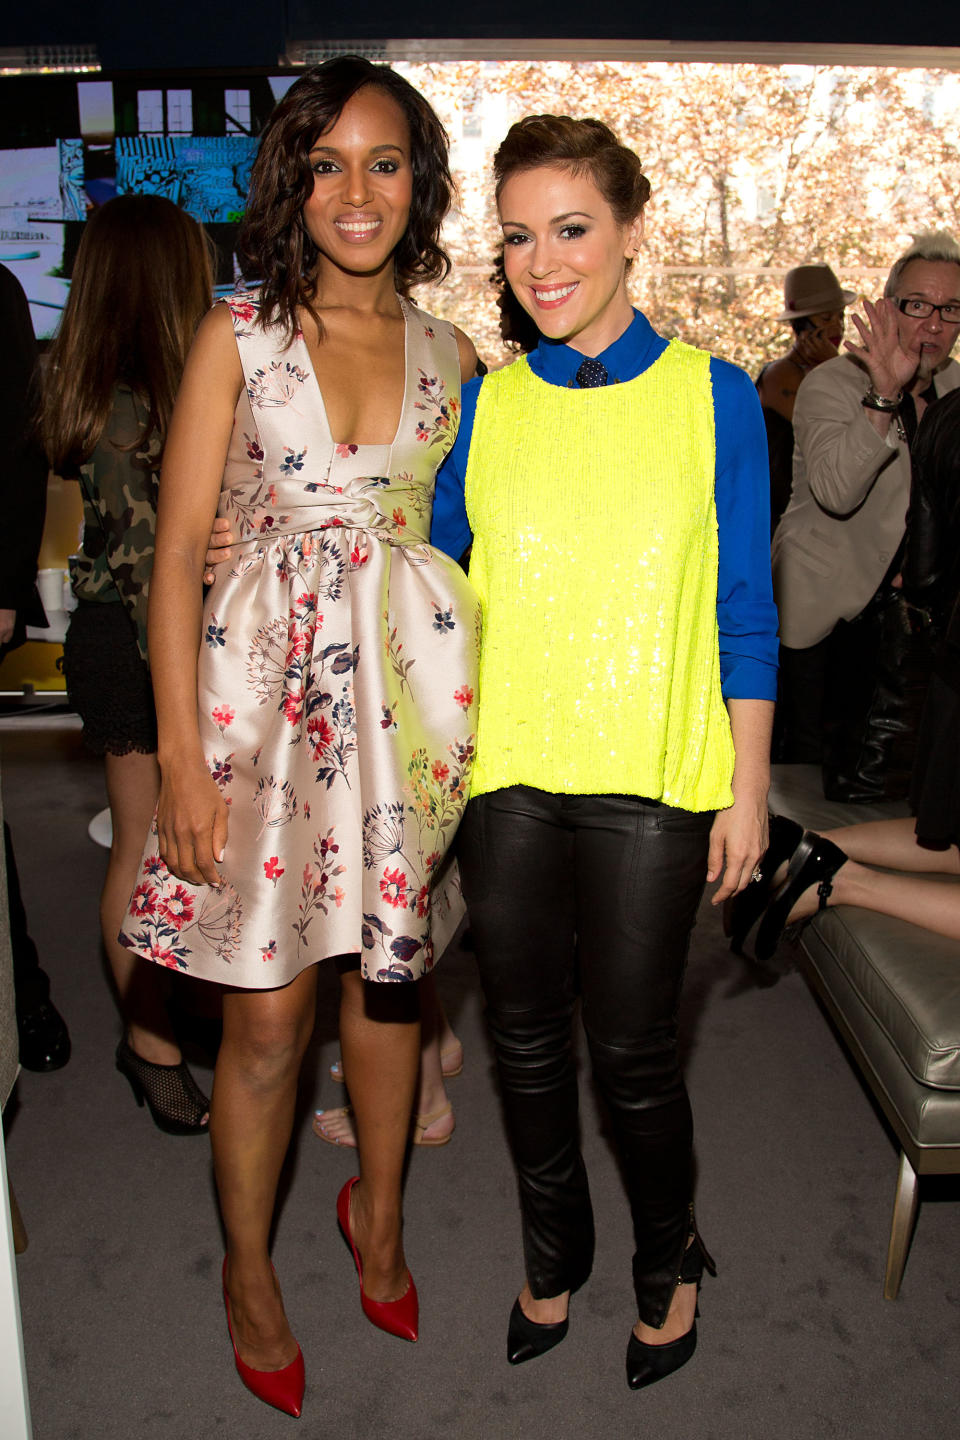 Actors Kerry Washington, left, and Alyssa Milano attend the "Project Runway" fashion show on Friday, Sept. 6, 2012, during Fashion Week in New York. (Photo by Dario Cantatore/Invision/AP)